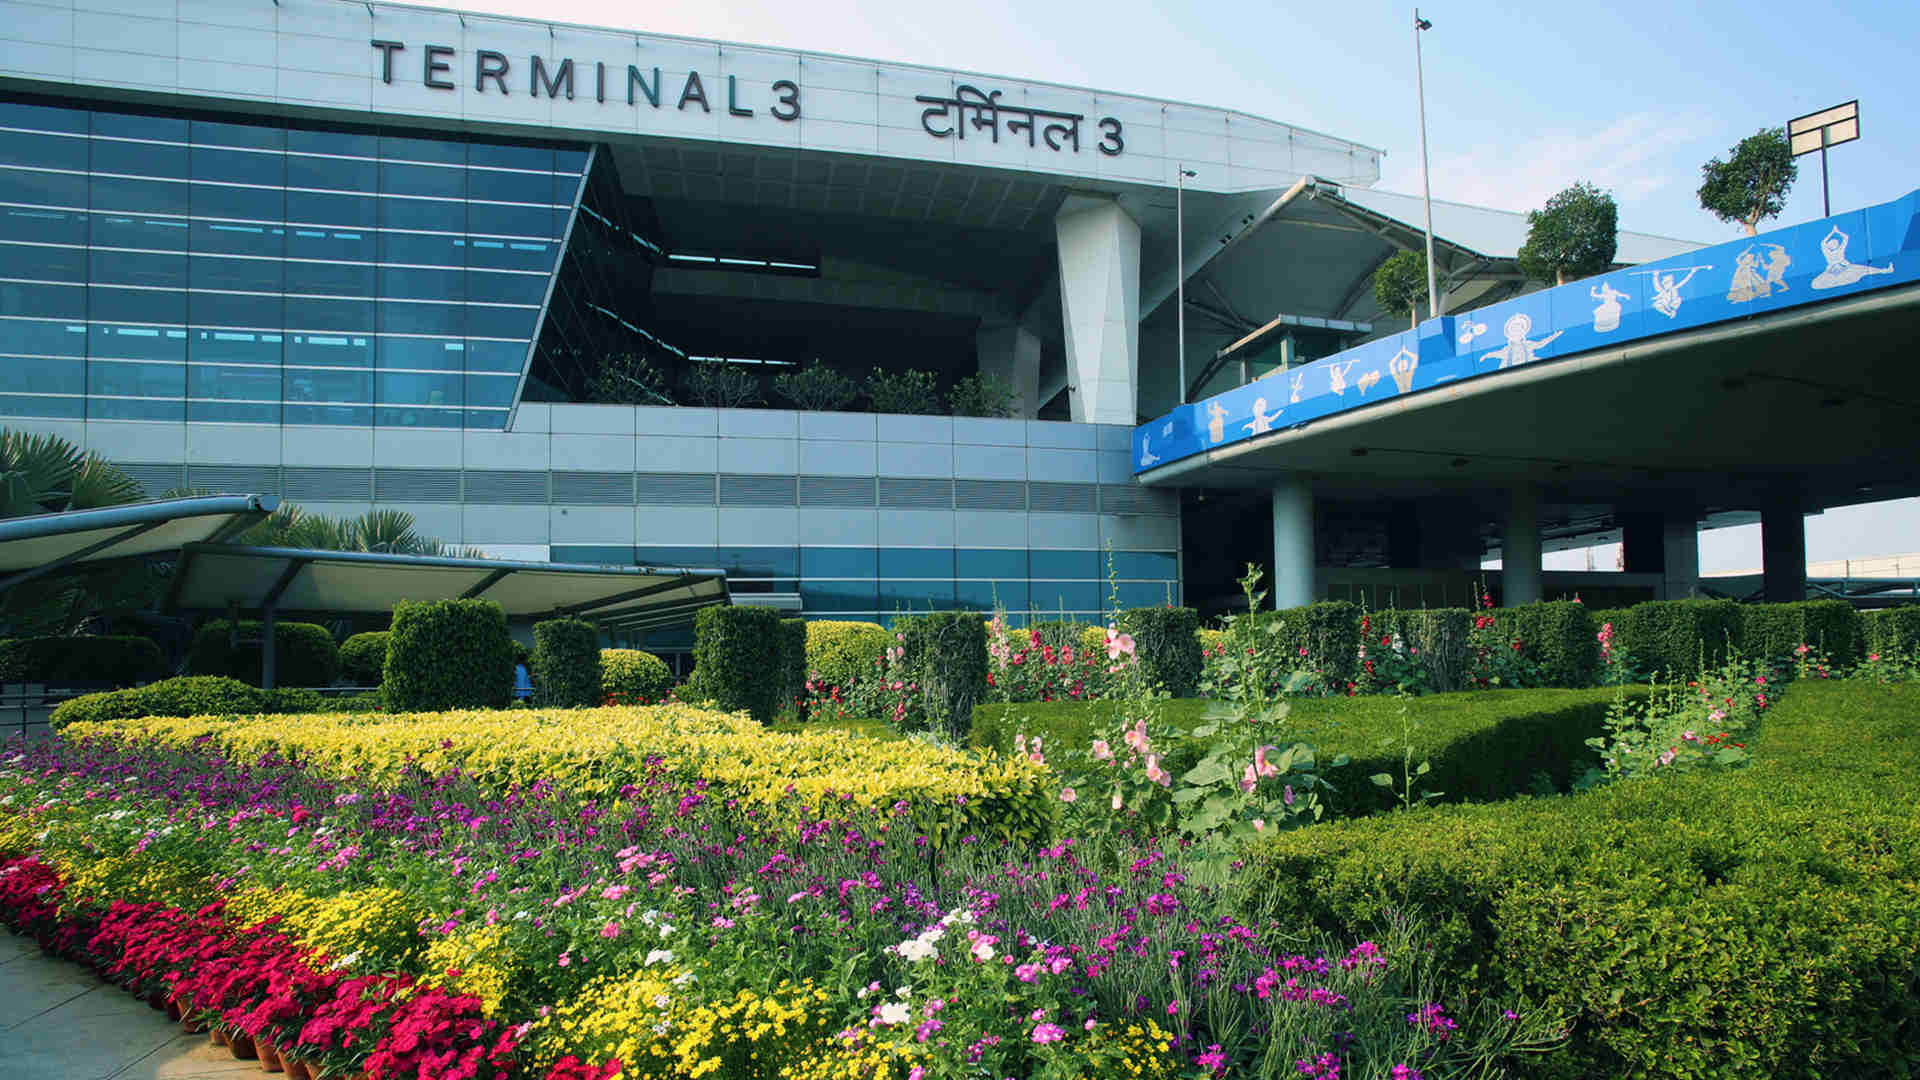 Delhi Airport now houses India's first General Aviation terminal facility for Private Jets